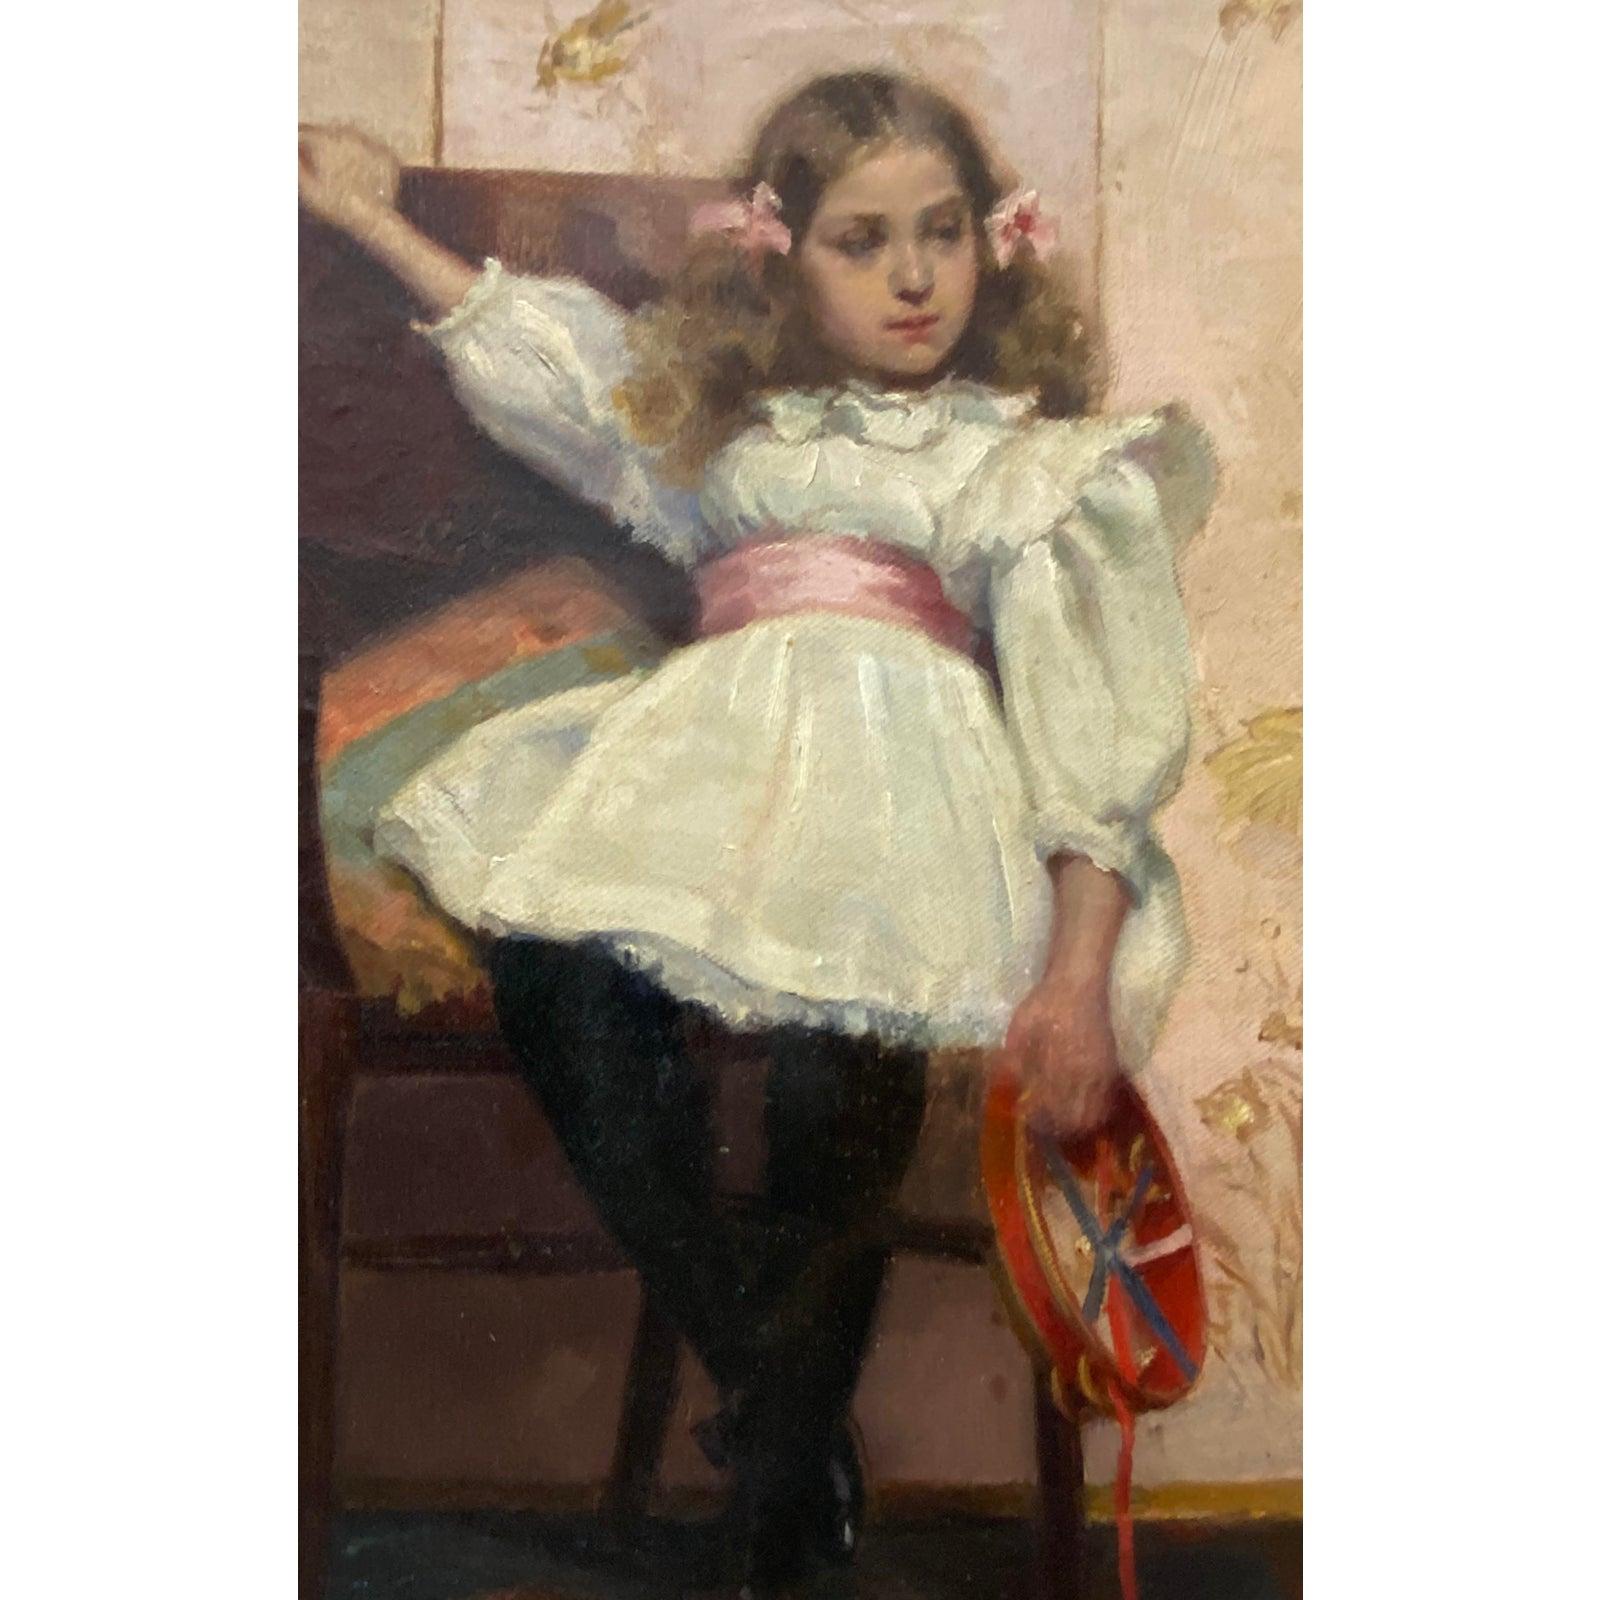 Ellen Starbuck Antique Oil Painting Girl w/ Tambourine 19th c.

Oil on canvas. Dimensions 10